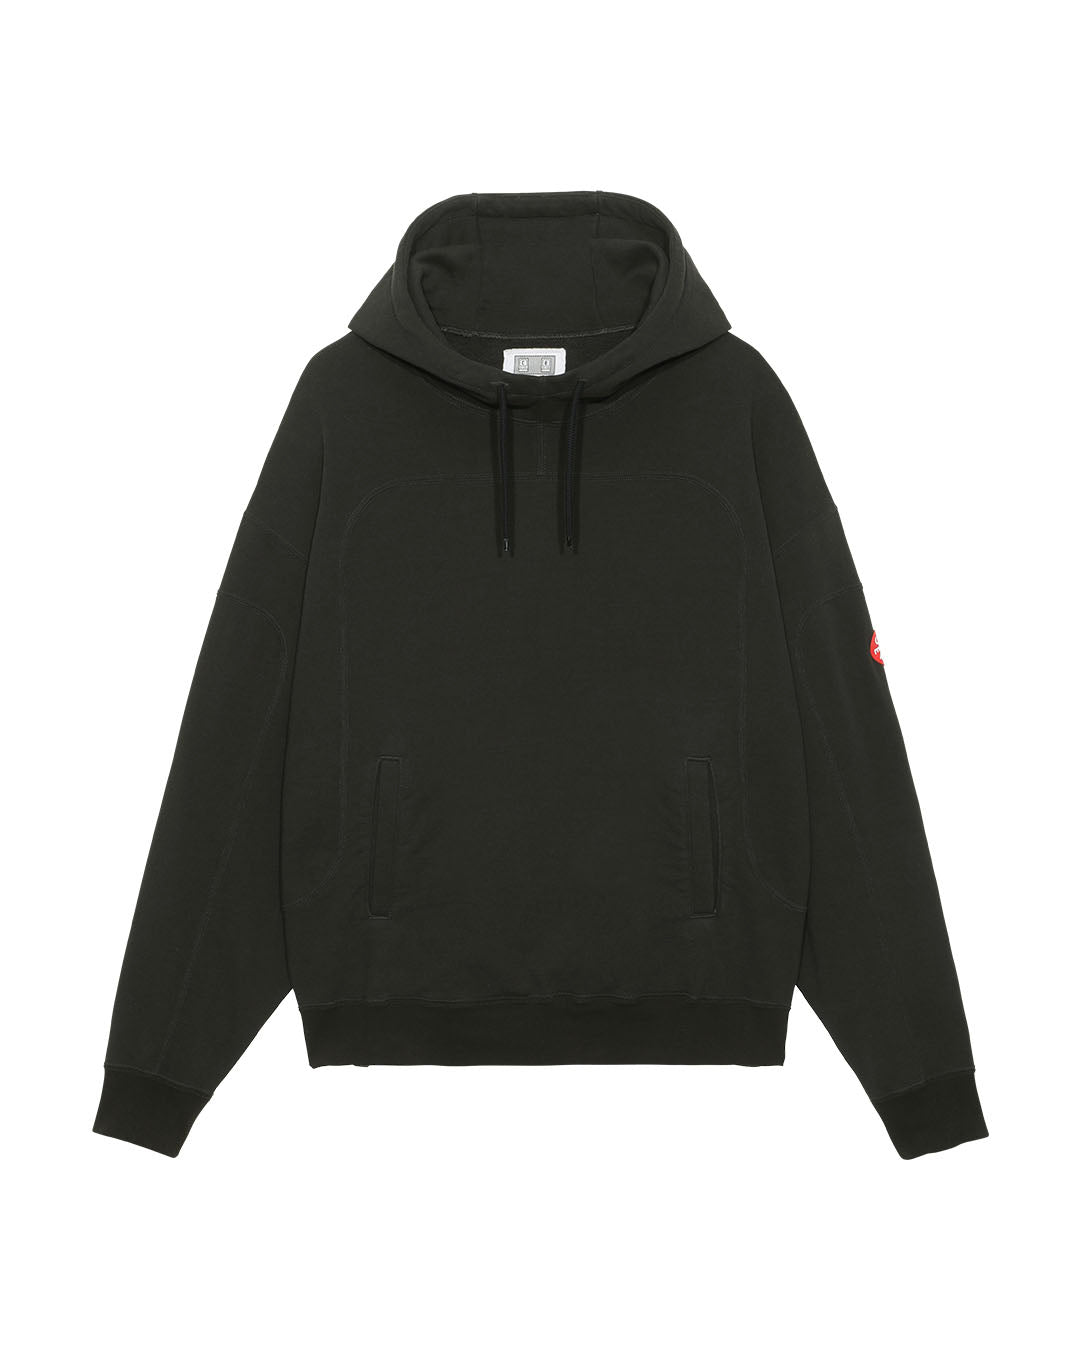 [CE] CURVED SWITCH HOODY - BLACK